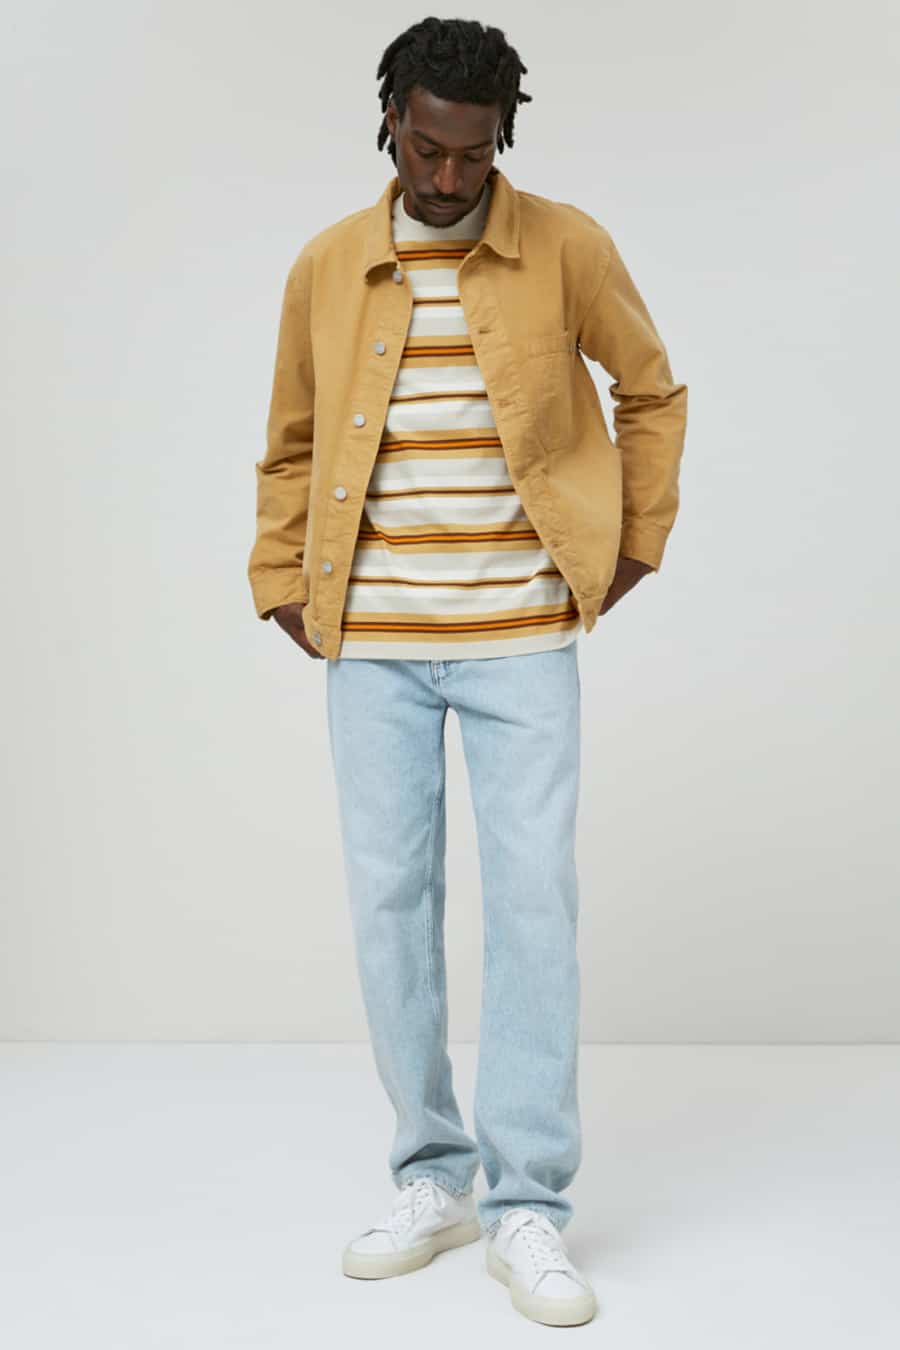 Men's pale wash denim jeans, striped T-shirt, yellow overshirt and white sneakers outfit